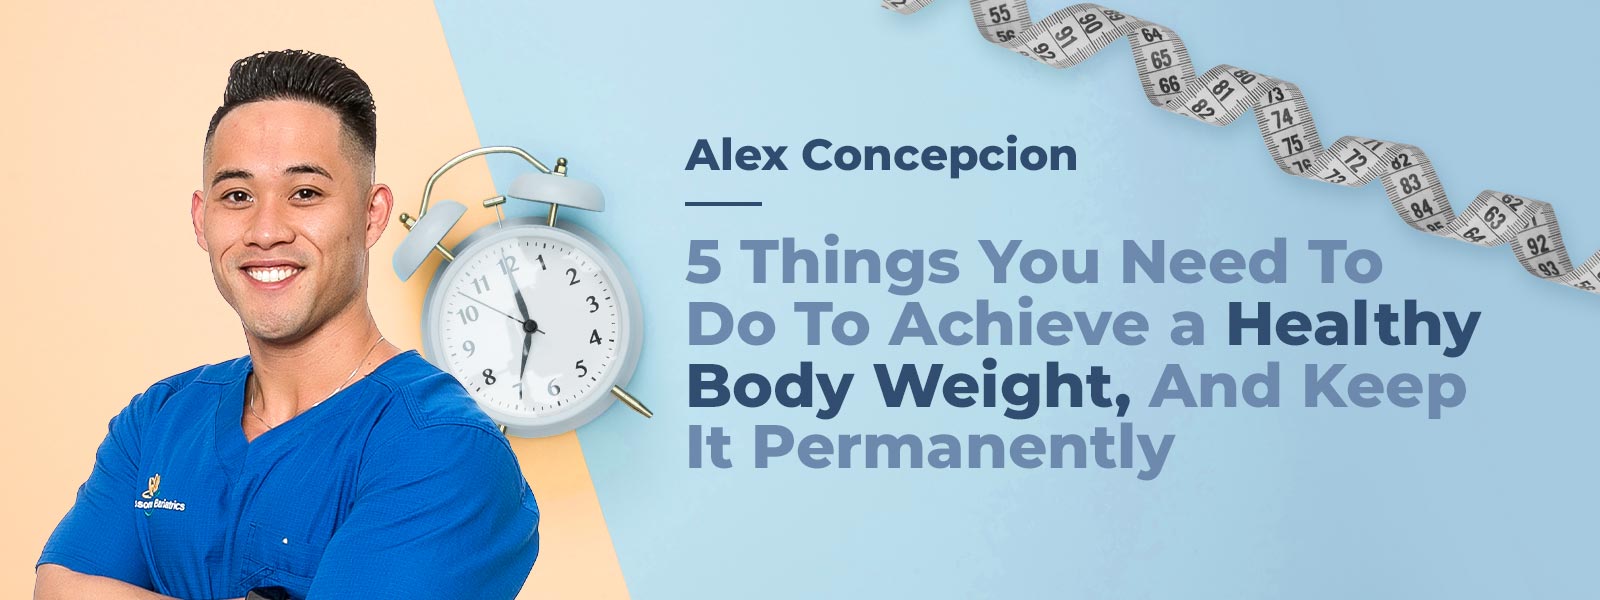 5 Things you need to do to achieve a healthy body weight, and keep it permanently